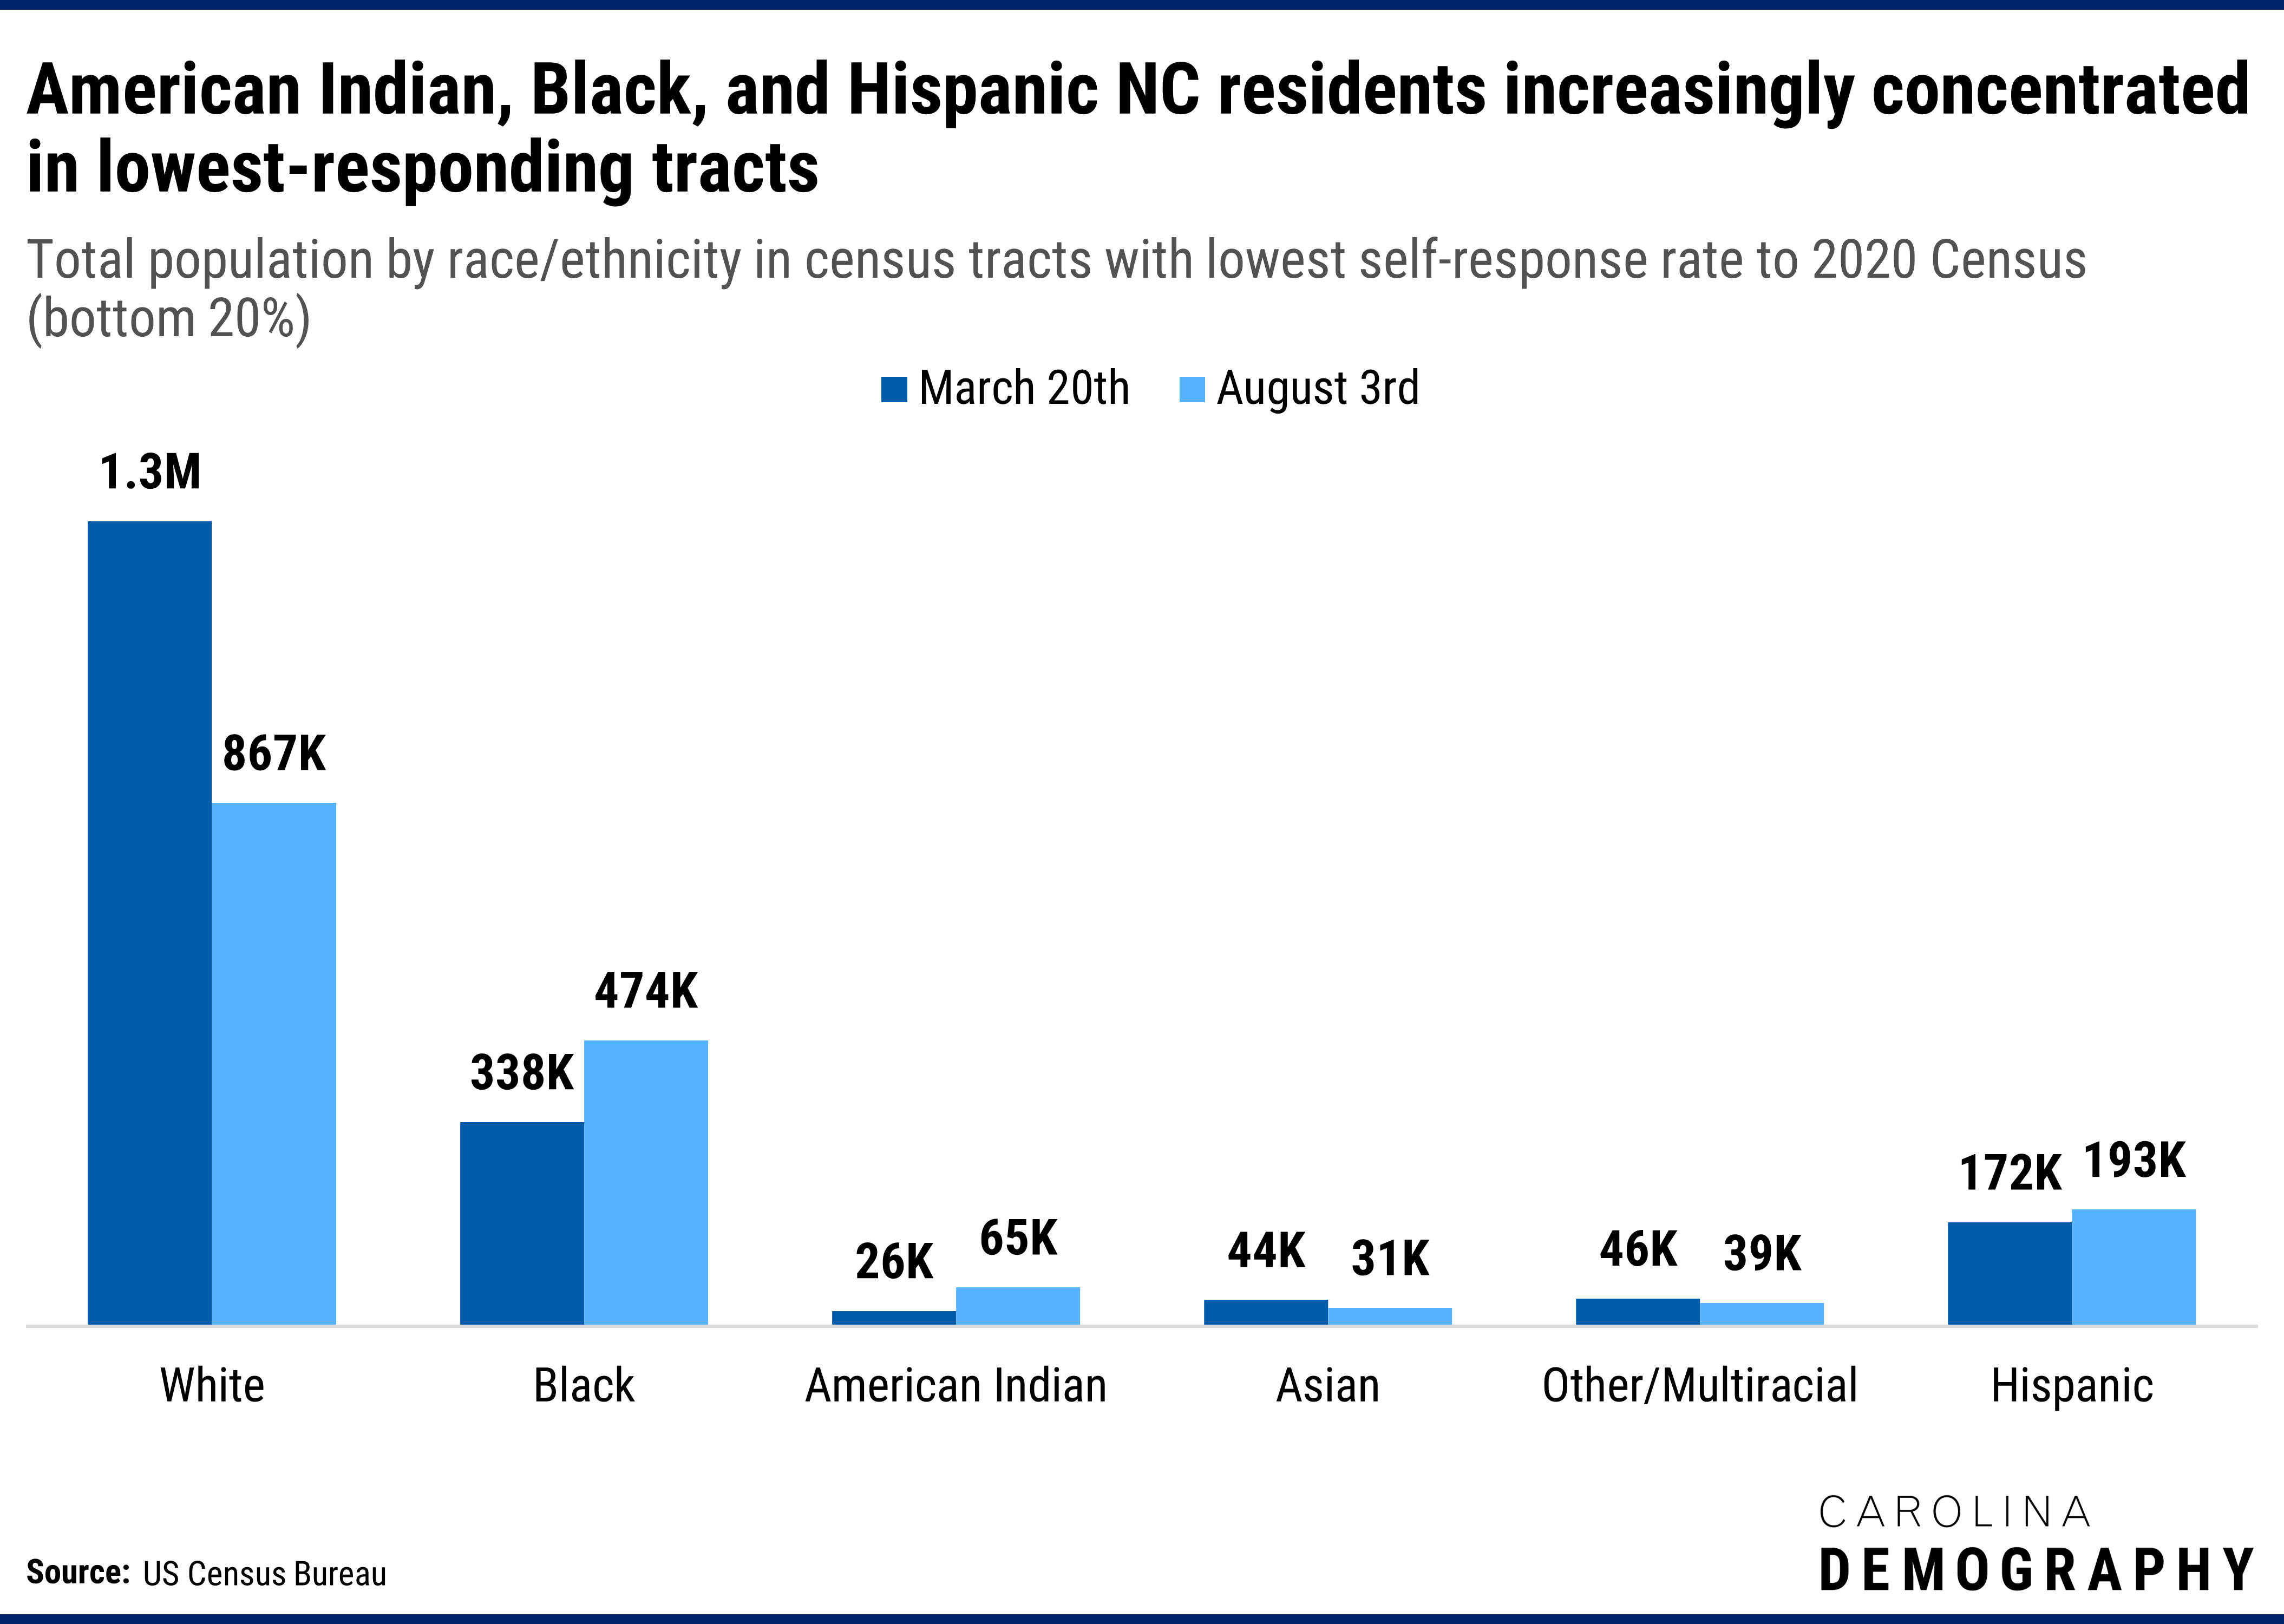 American Indian, Black, and Hispanic NC residents increasingly concentrated in lowest-responding tracts. Total population by race/ethnicity in census tracts with lowest self-response rate to 2020 Census (bottom 20%)